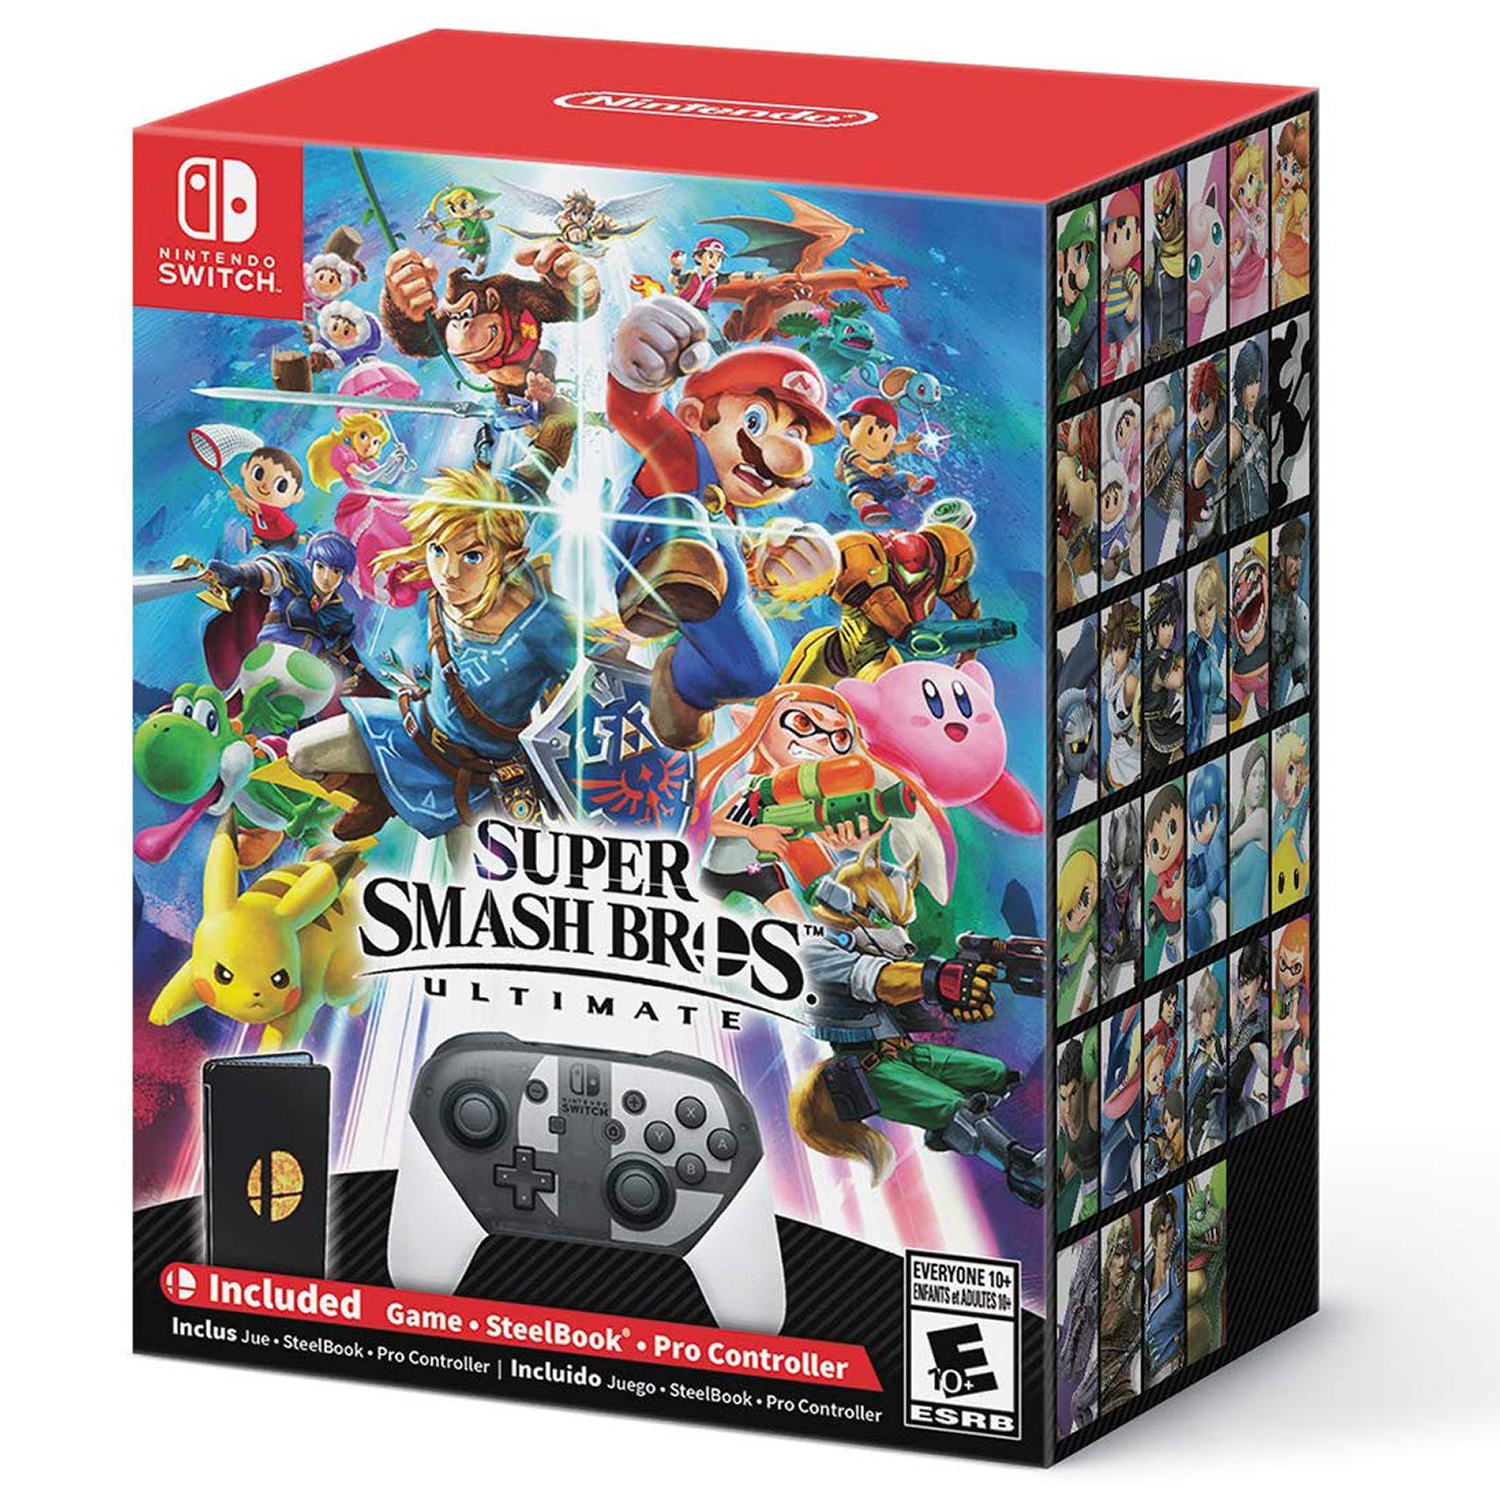 Super Smash Bros. Ultimate Special Edition, Nintendo Switch, 045496594442 - image 1 of 14